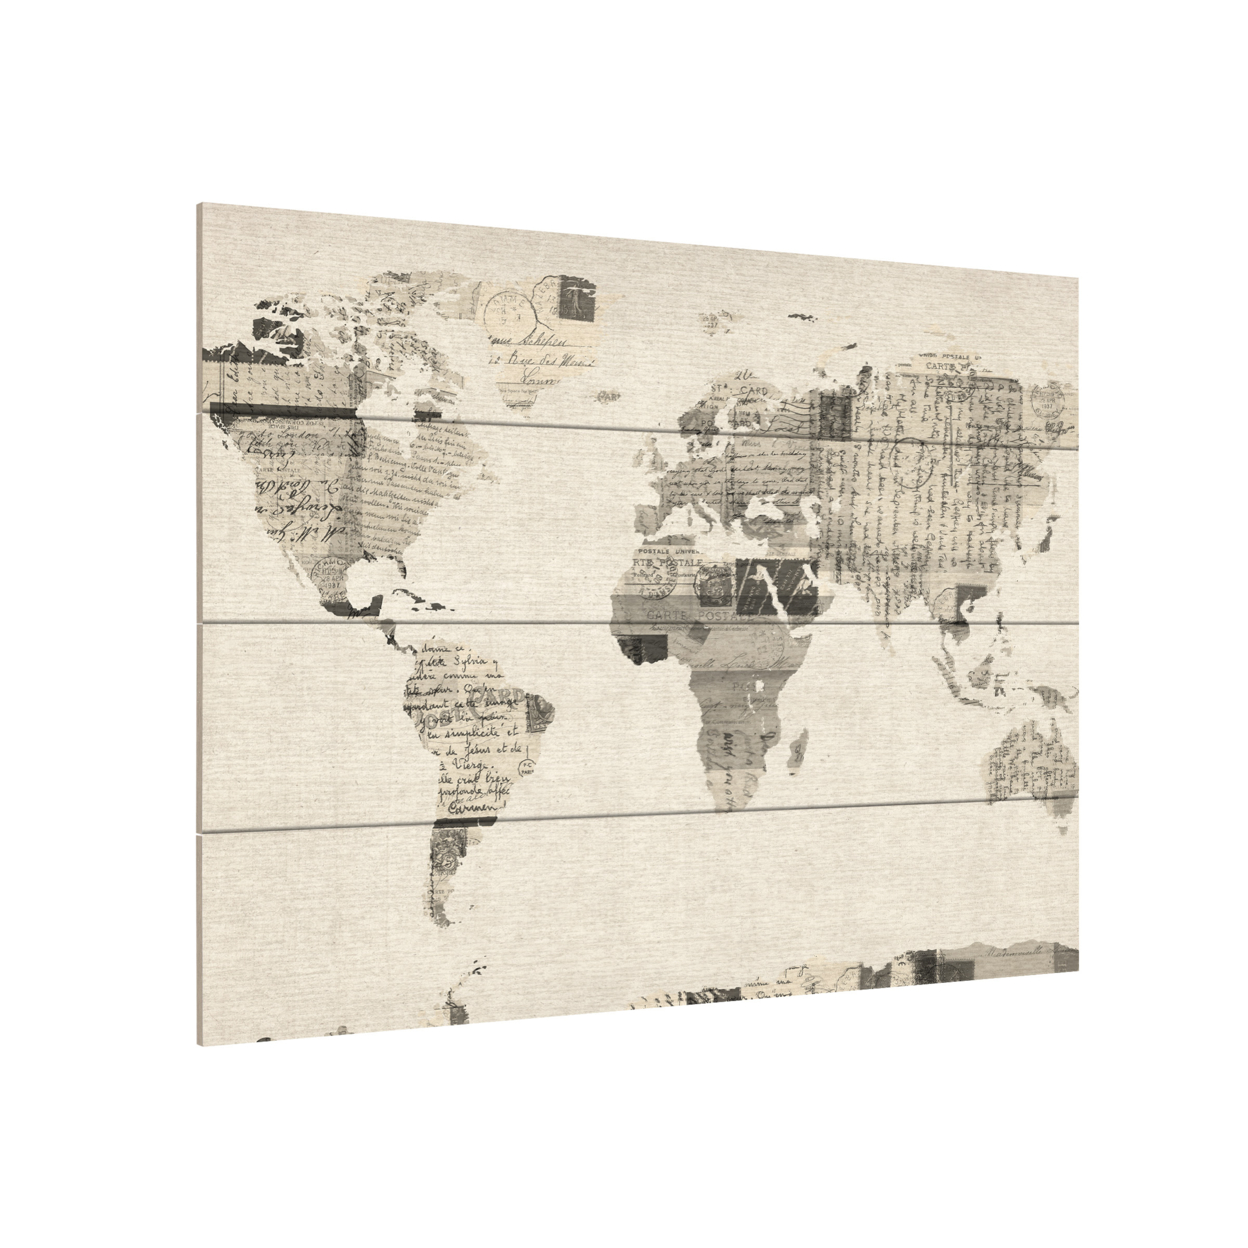 Wall Art 12 X 16 Inches Titled Vintage Postcards World Map Ready To Hang Printed On Wooden Planks